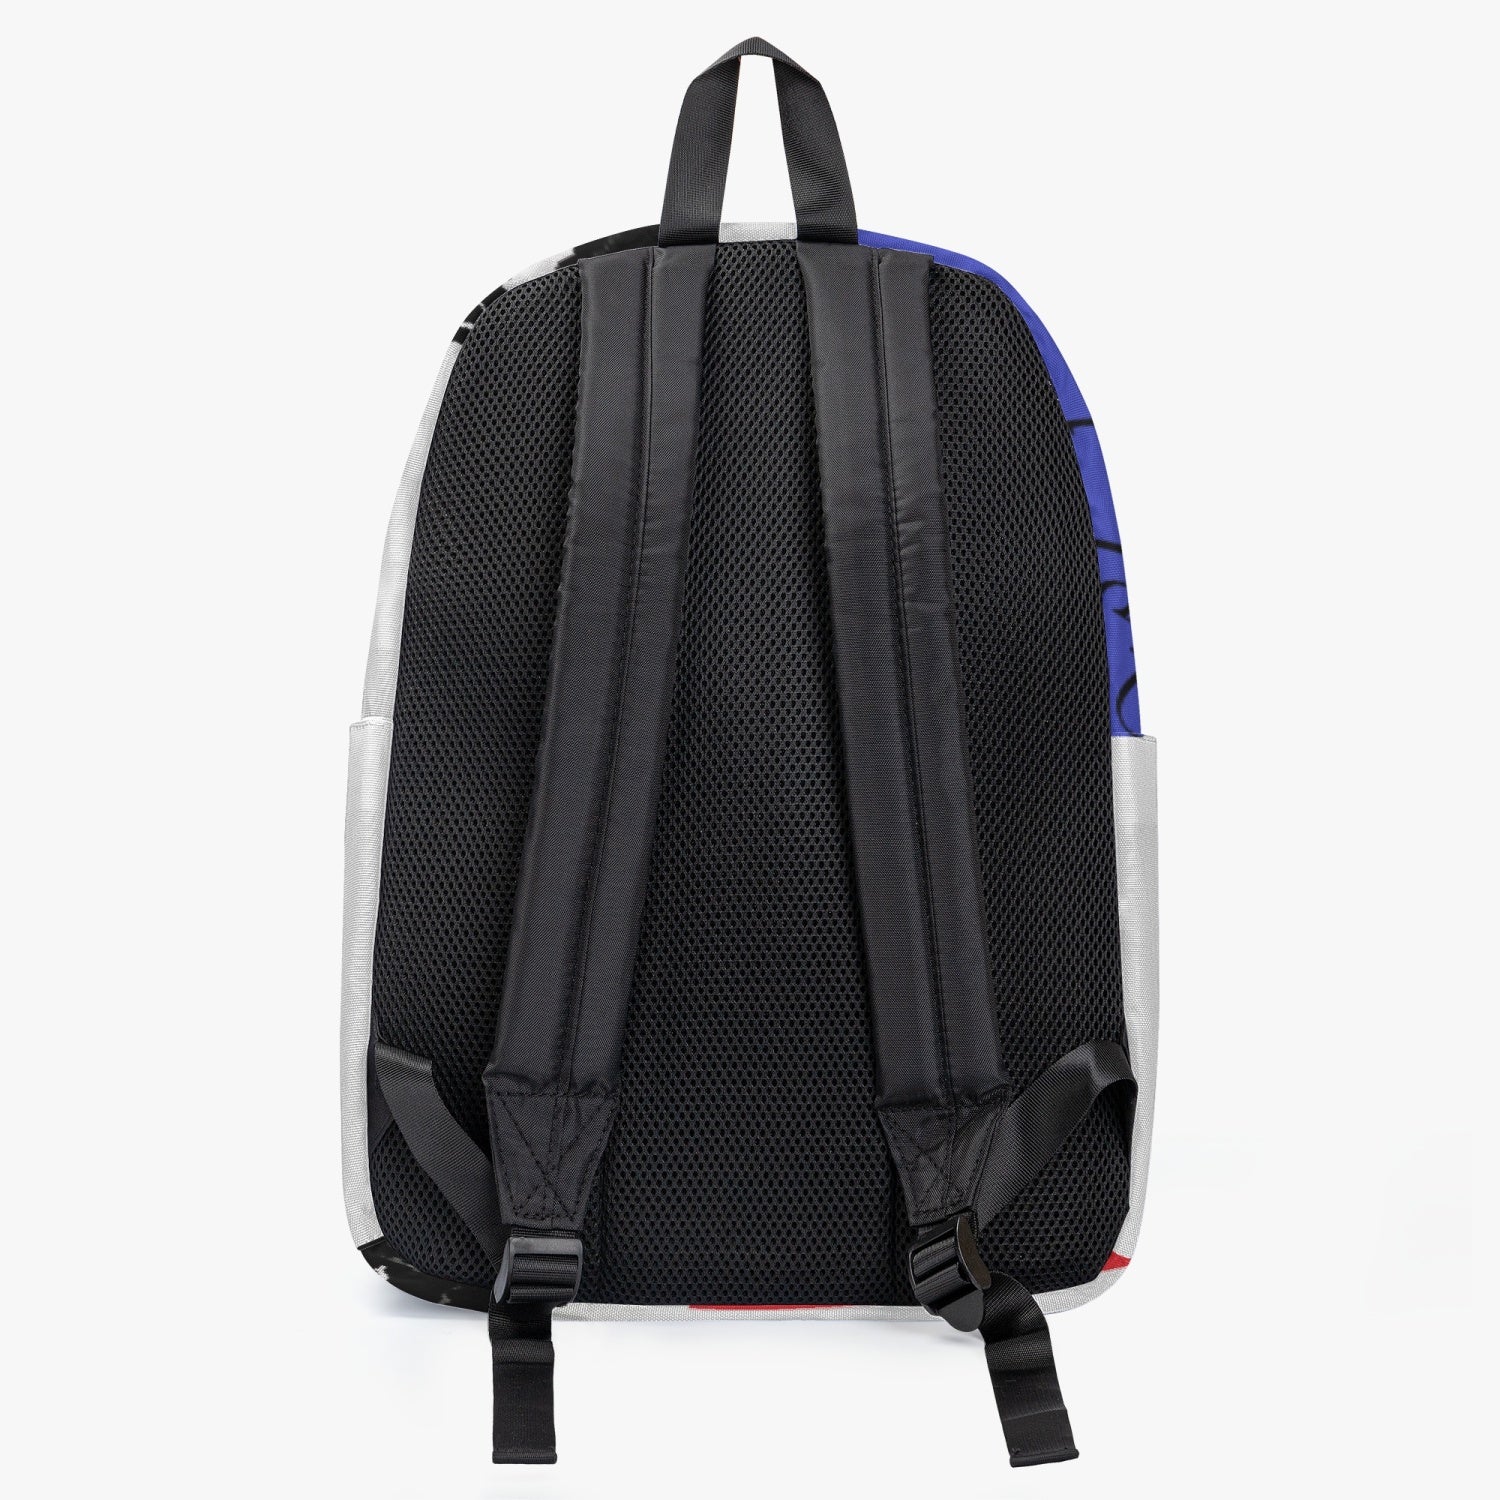 204. All-over-print Canvas Backpack